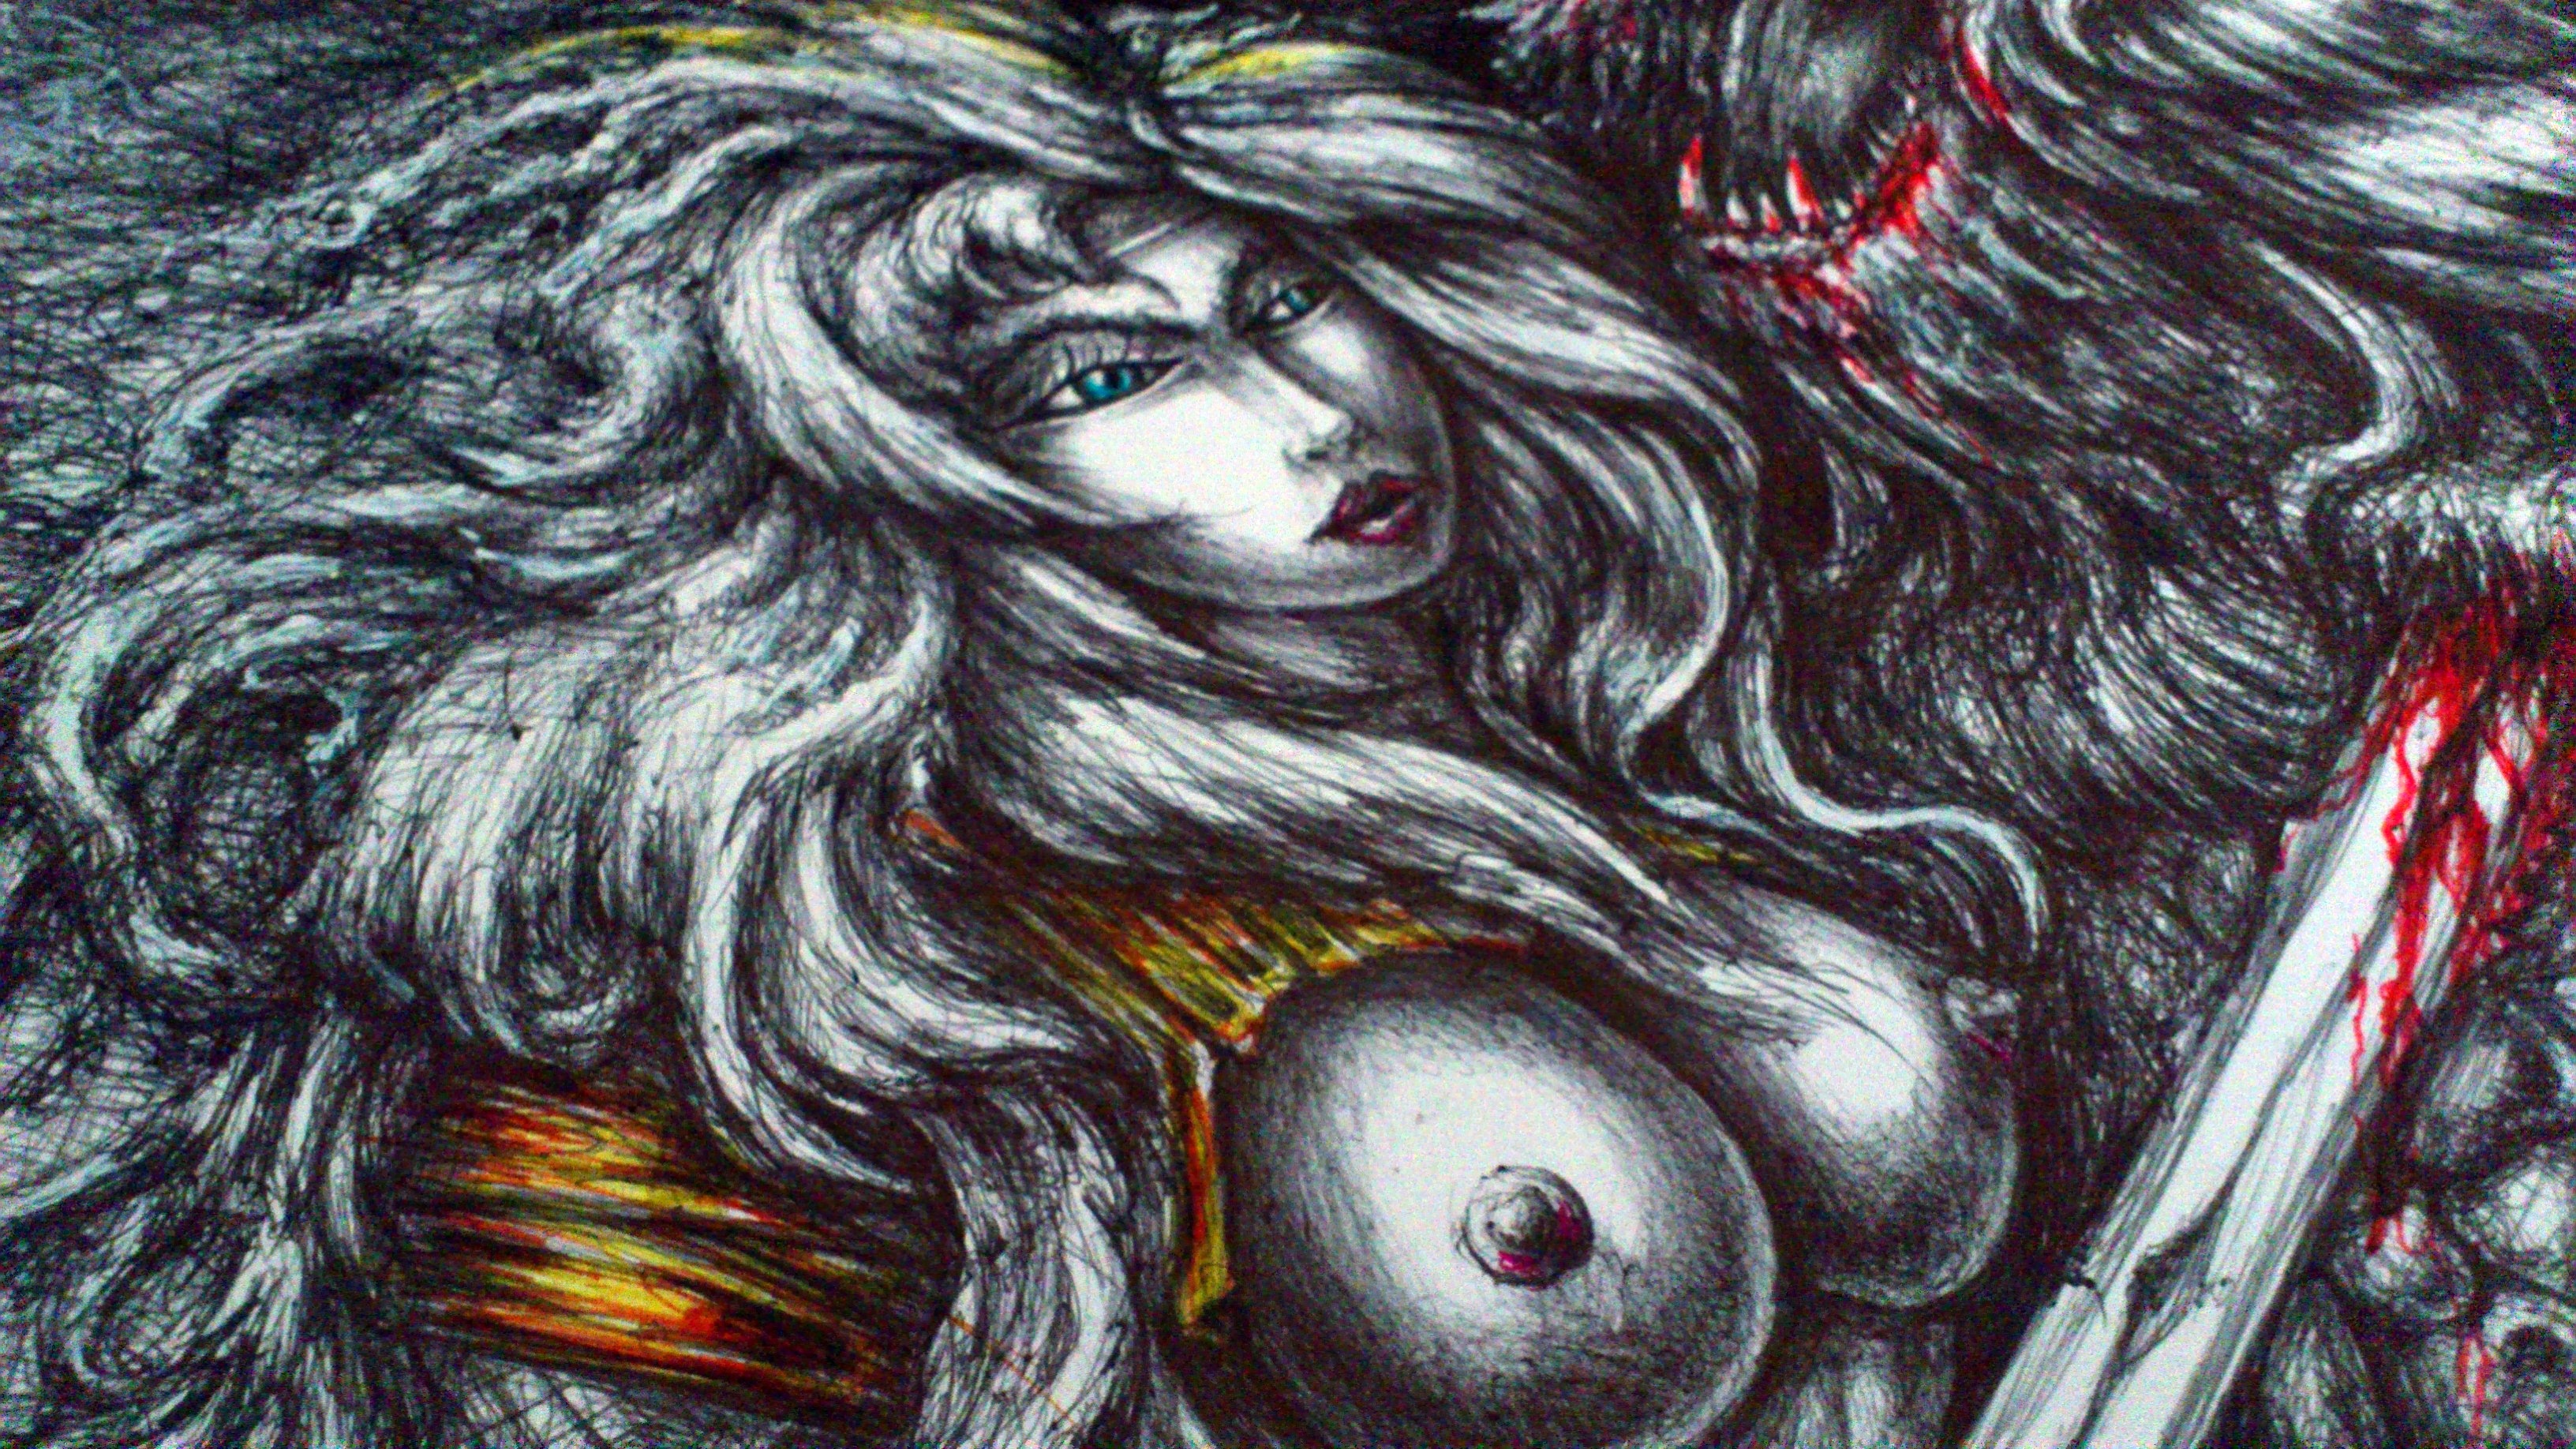 Angel Piangelo : 'MOONLIGHT SHADOW', 2017 Other Painting, Nudes. Drawing Painting - mixed technique with acrylics, color pencils and black pens - Difficult Technique as Black Permanent Pens not black pencils were used for the main drawing, meaning that any mistake was impossible to be deleted or to correct - Fantasy Hot Dark Themed Artwork with an erotic flavor - with a black ...